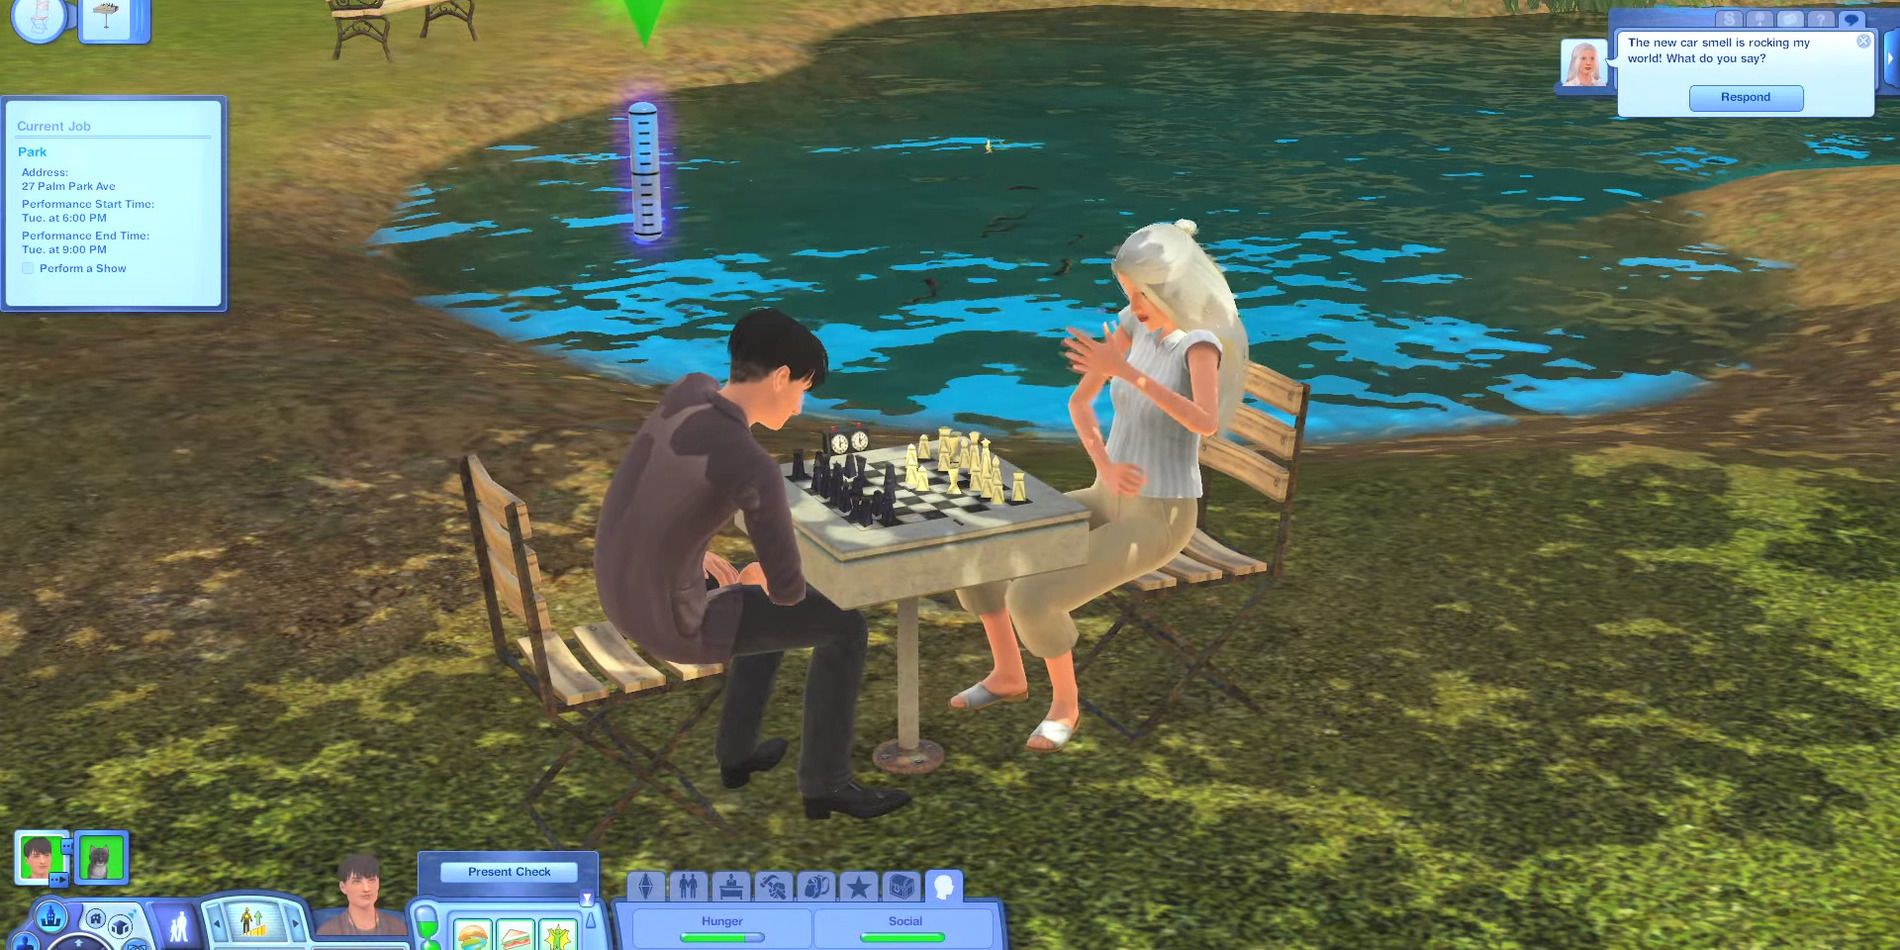 Two Sims play chess in a Sunset Valley park, while one Sim (left) gains logic skill. In the top-right corner, a notification pops up where the other Sim (right) talks about the "new car smell" they experienced on their drive there.